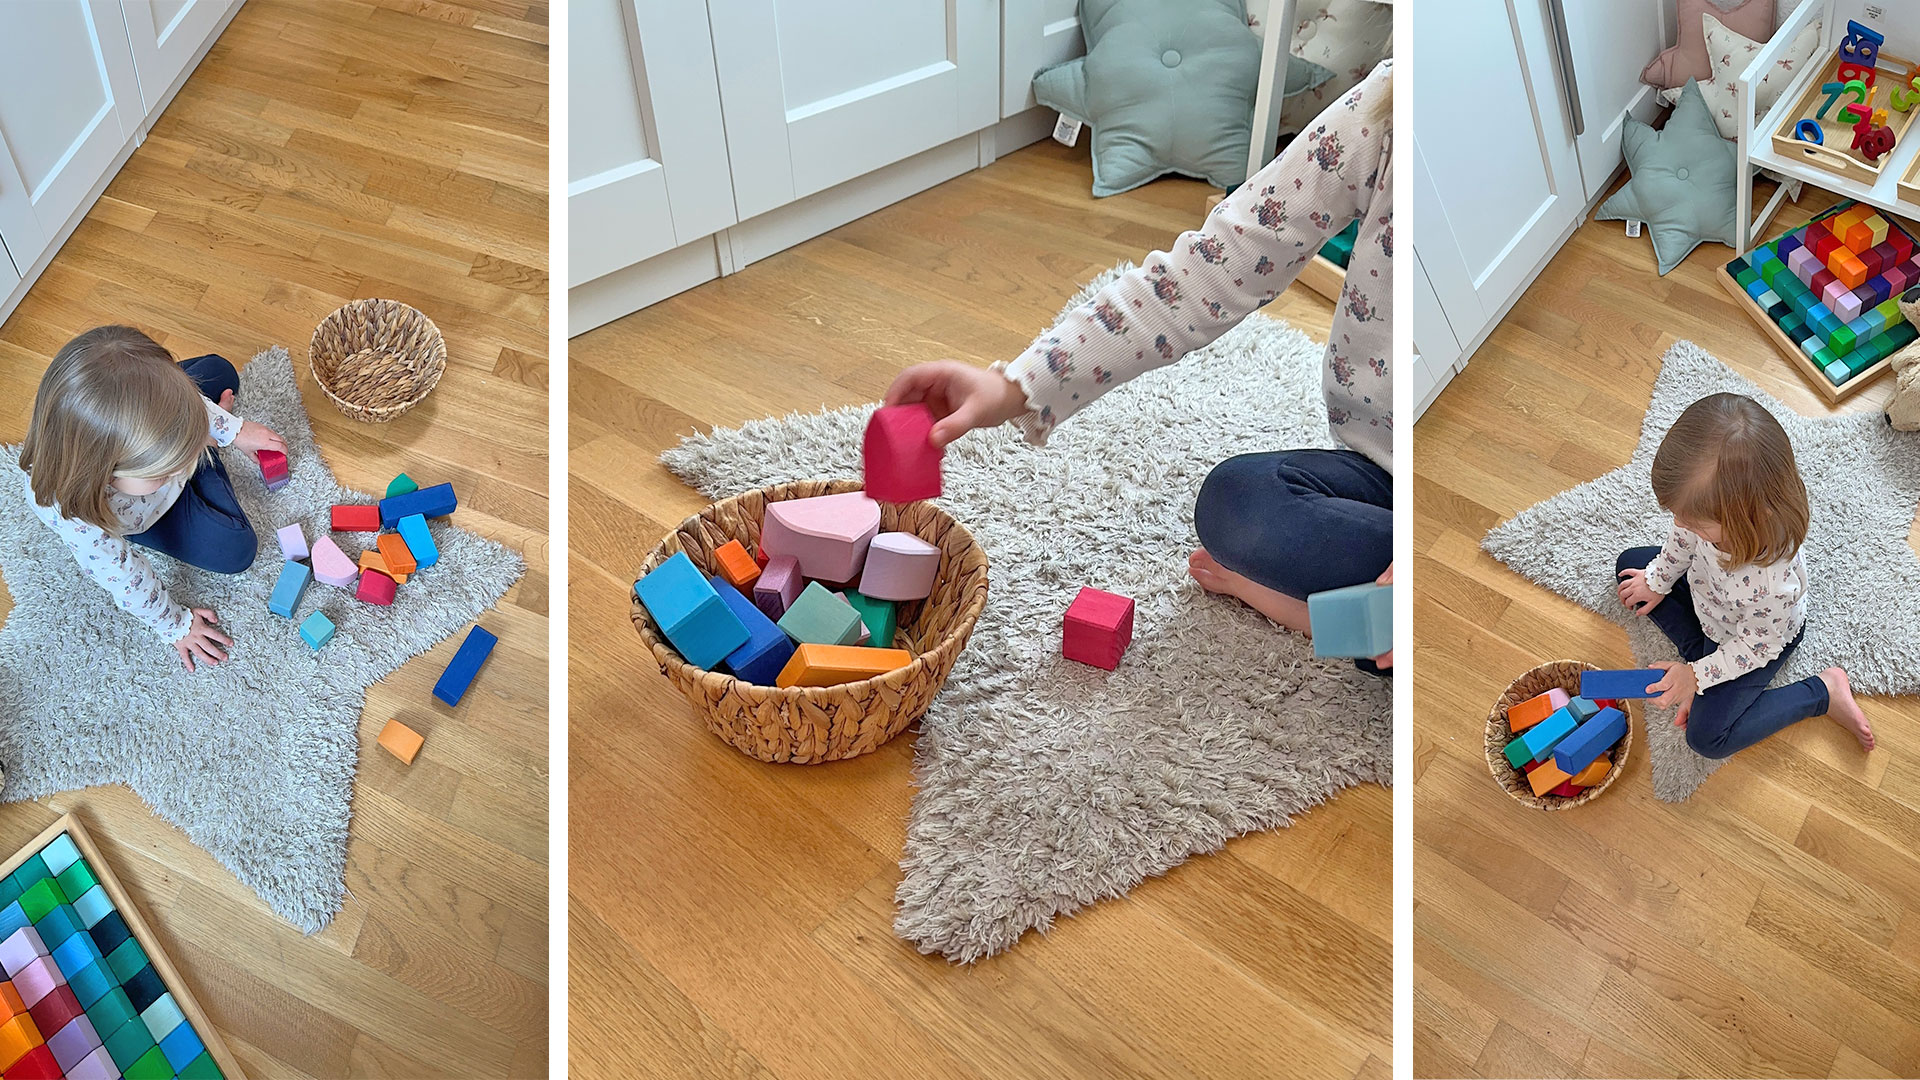 Little girl sits on the floor and puts colourful wooden building blocks into a wicker basket.